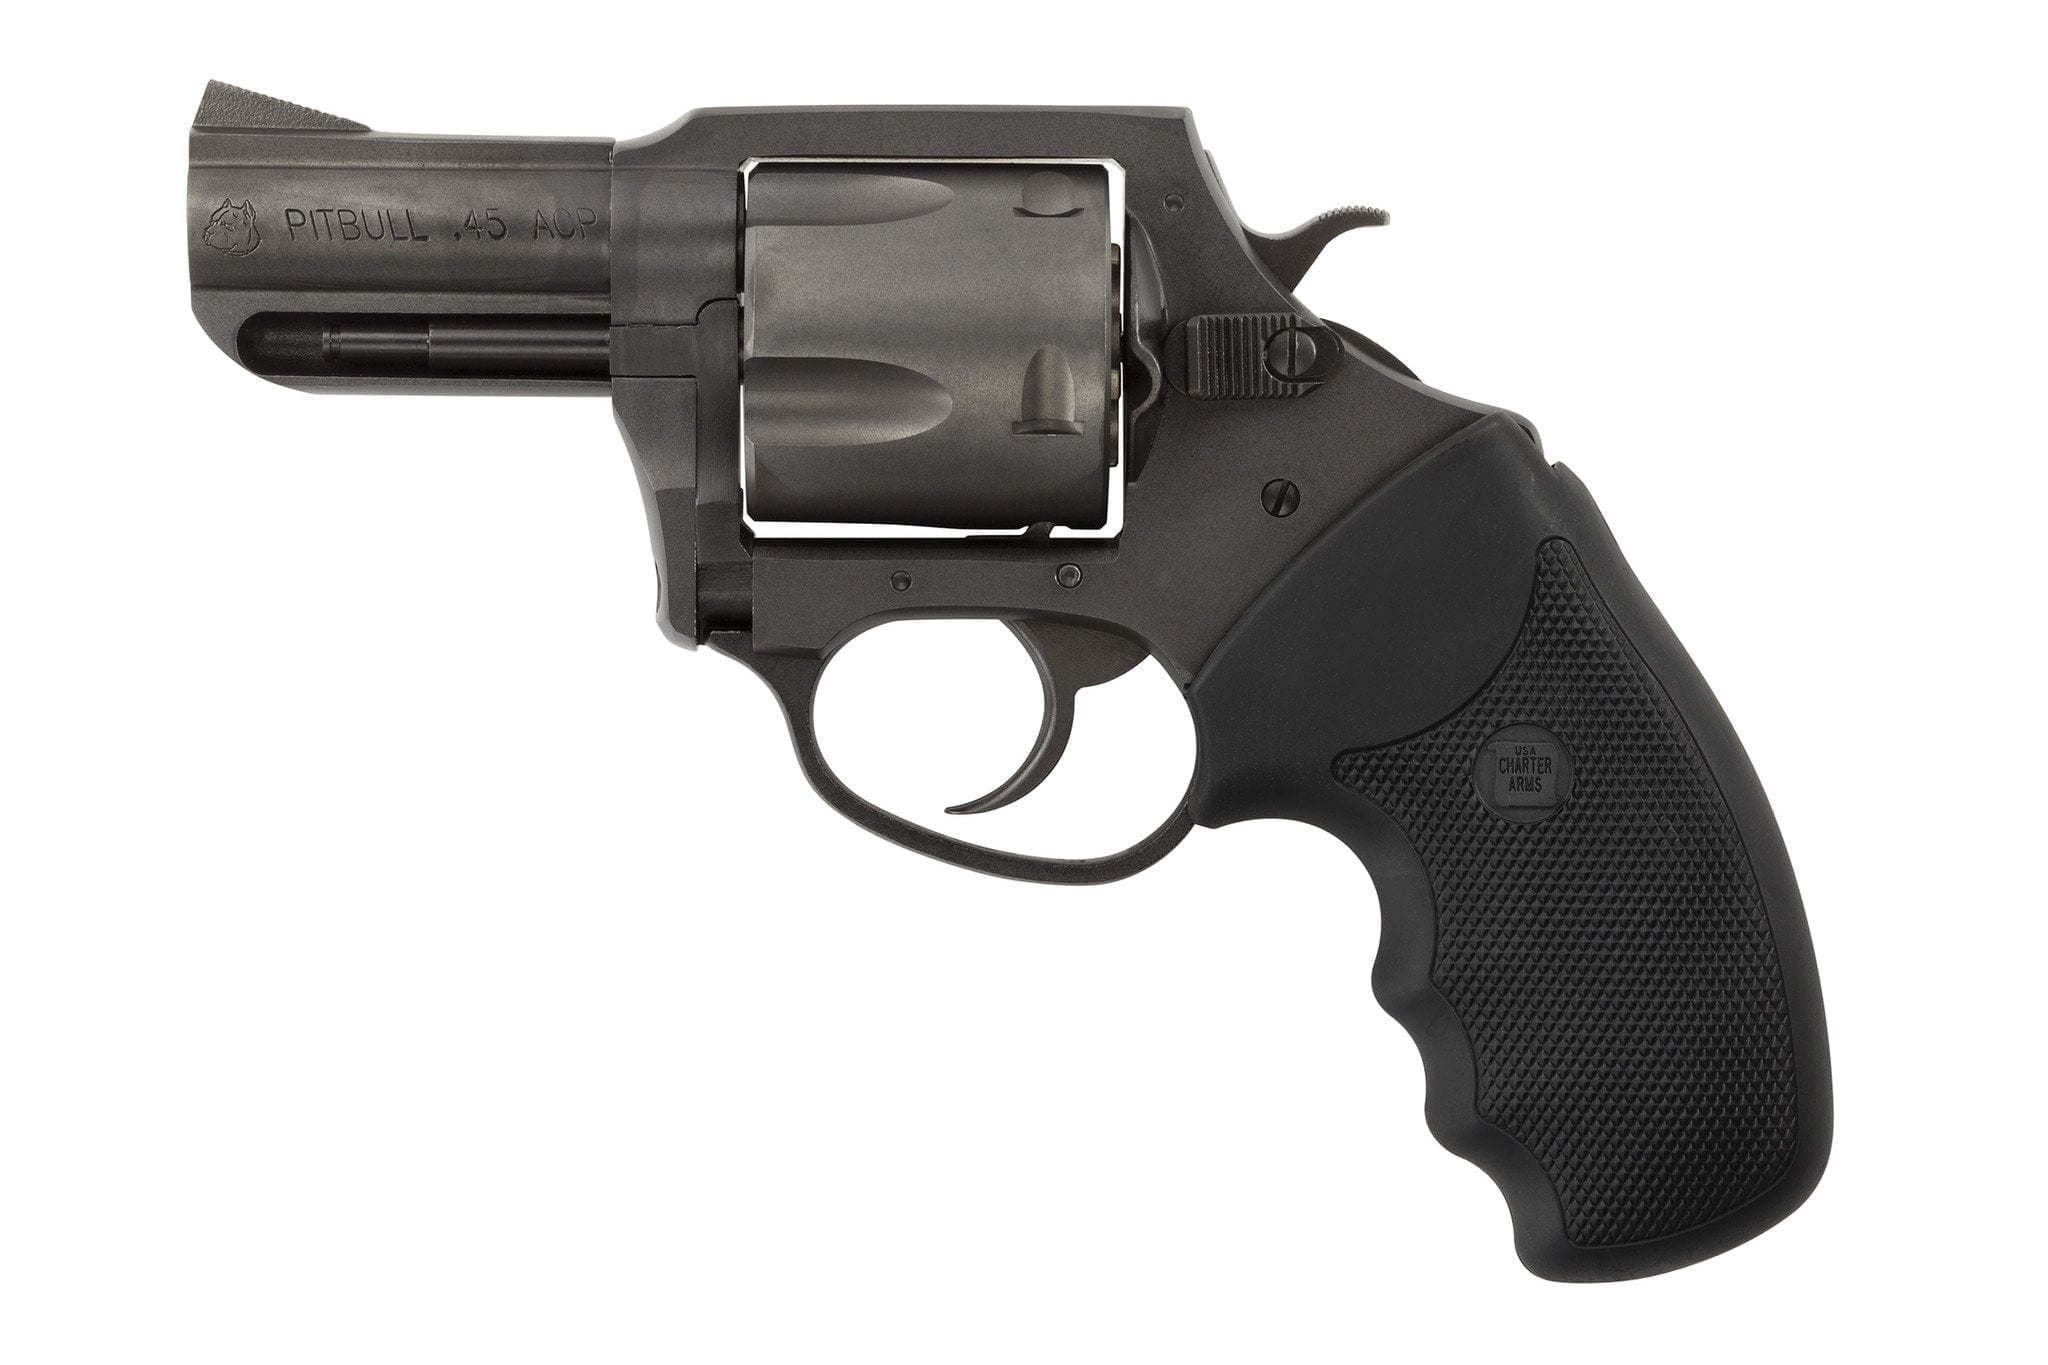 Charter Arms Pitbull 45 ACP. A concealed carry revolver 